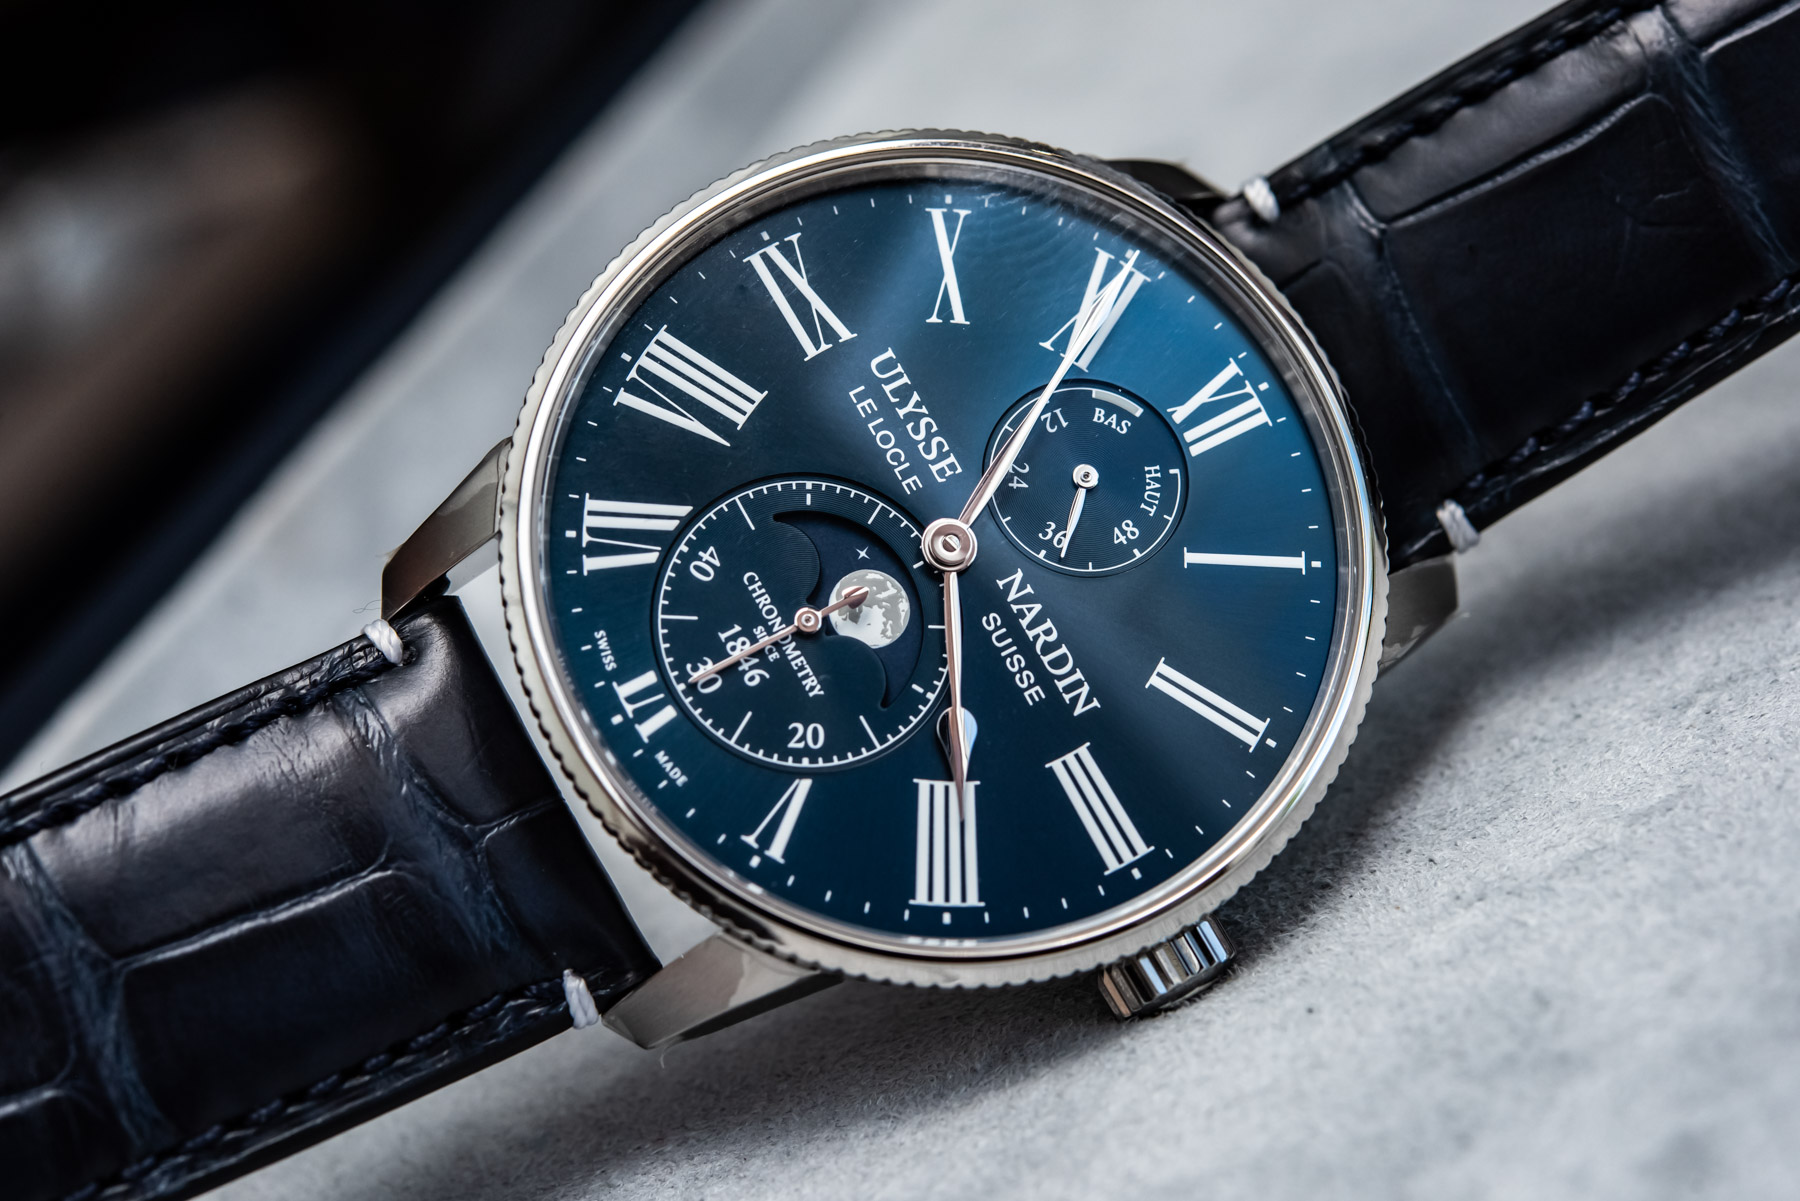 Girard-Perregaux And Ulysse Nardin Leave Kering Group For Independent ...